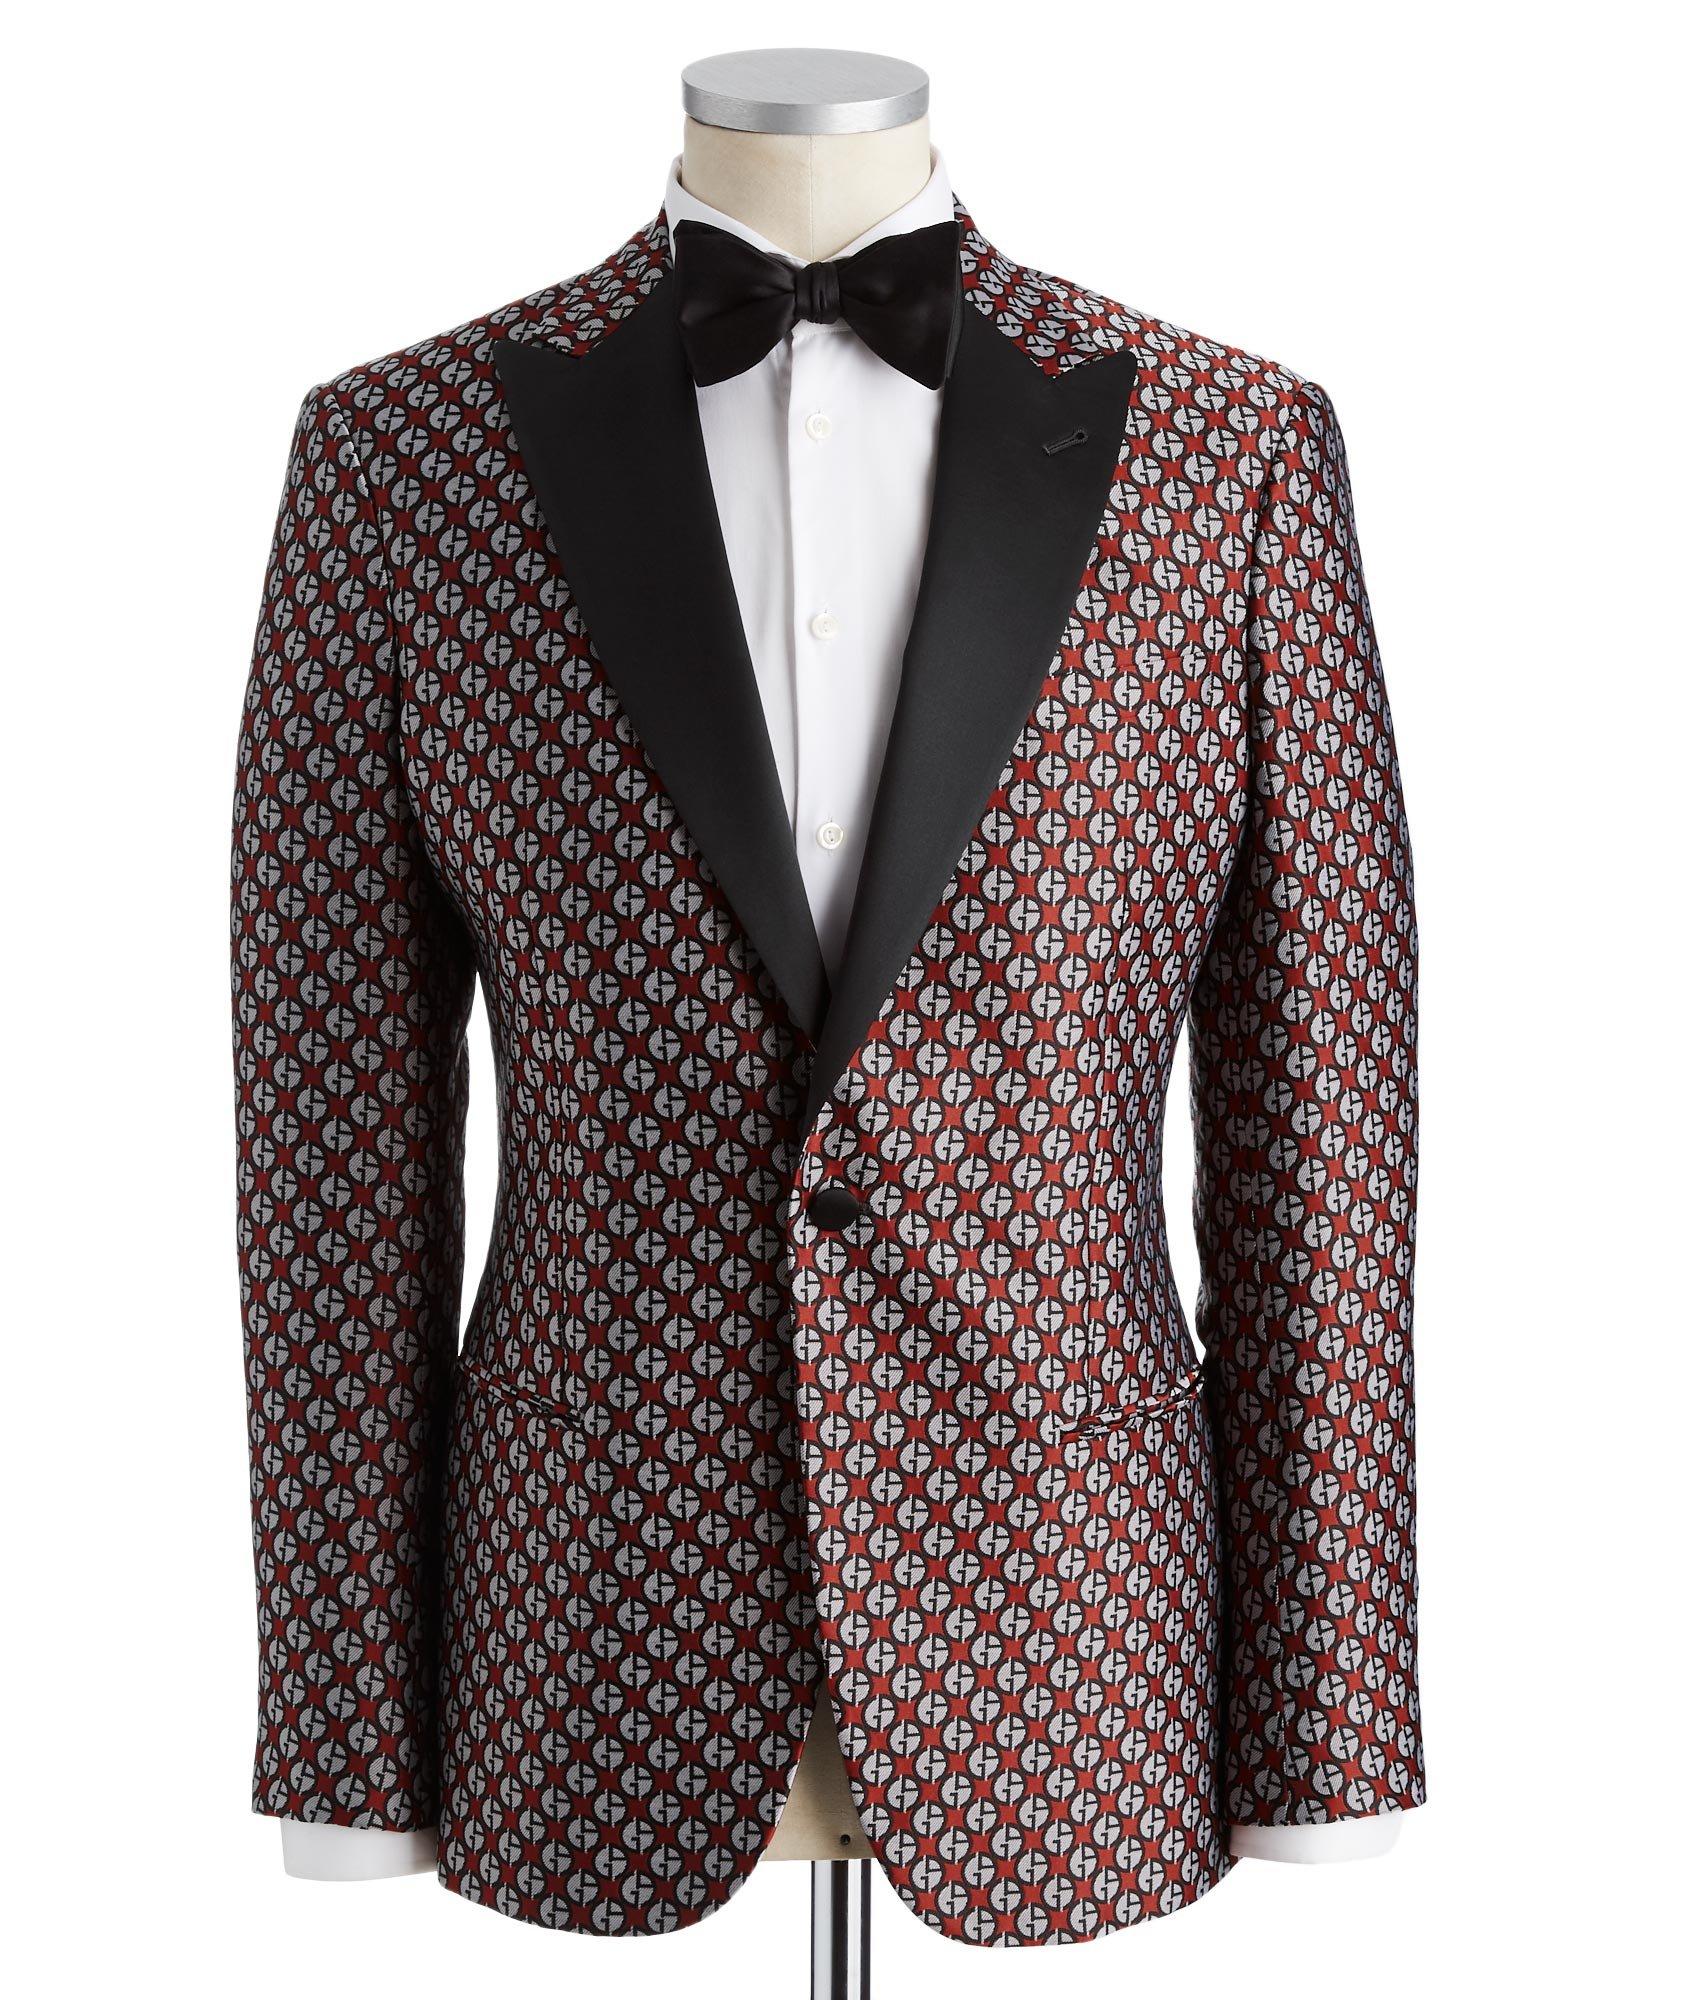 Exclusive Edition Soho Cocktail Jacket image 0